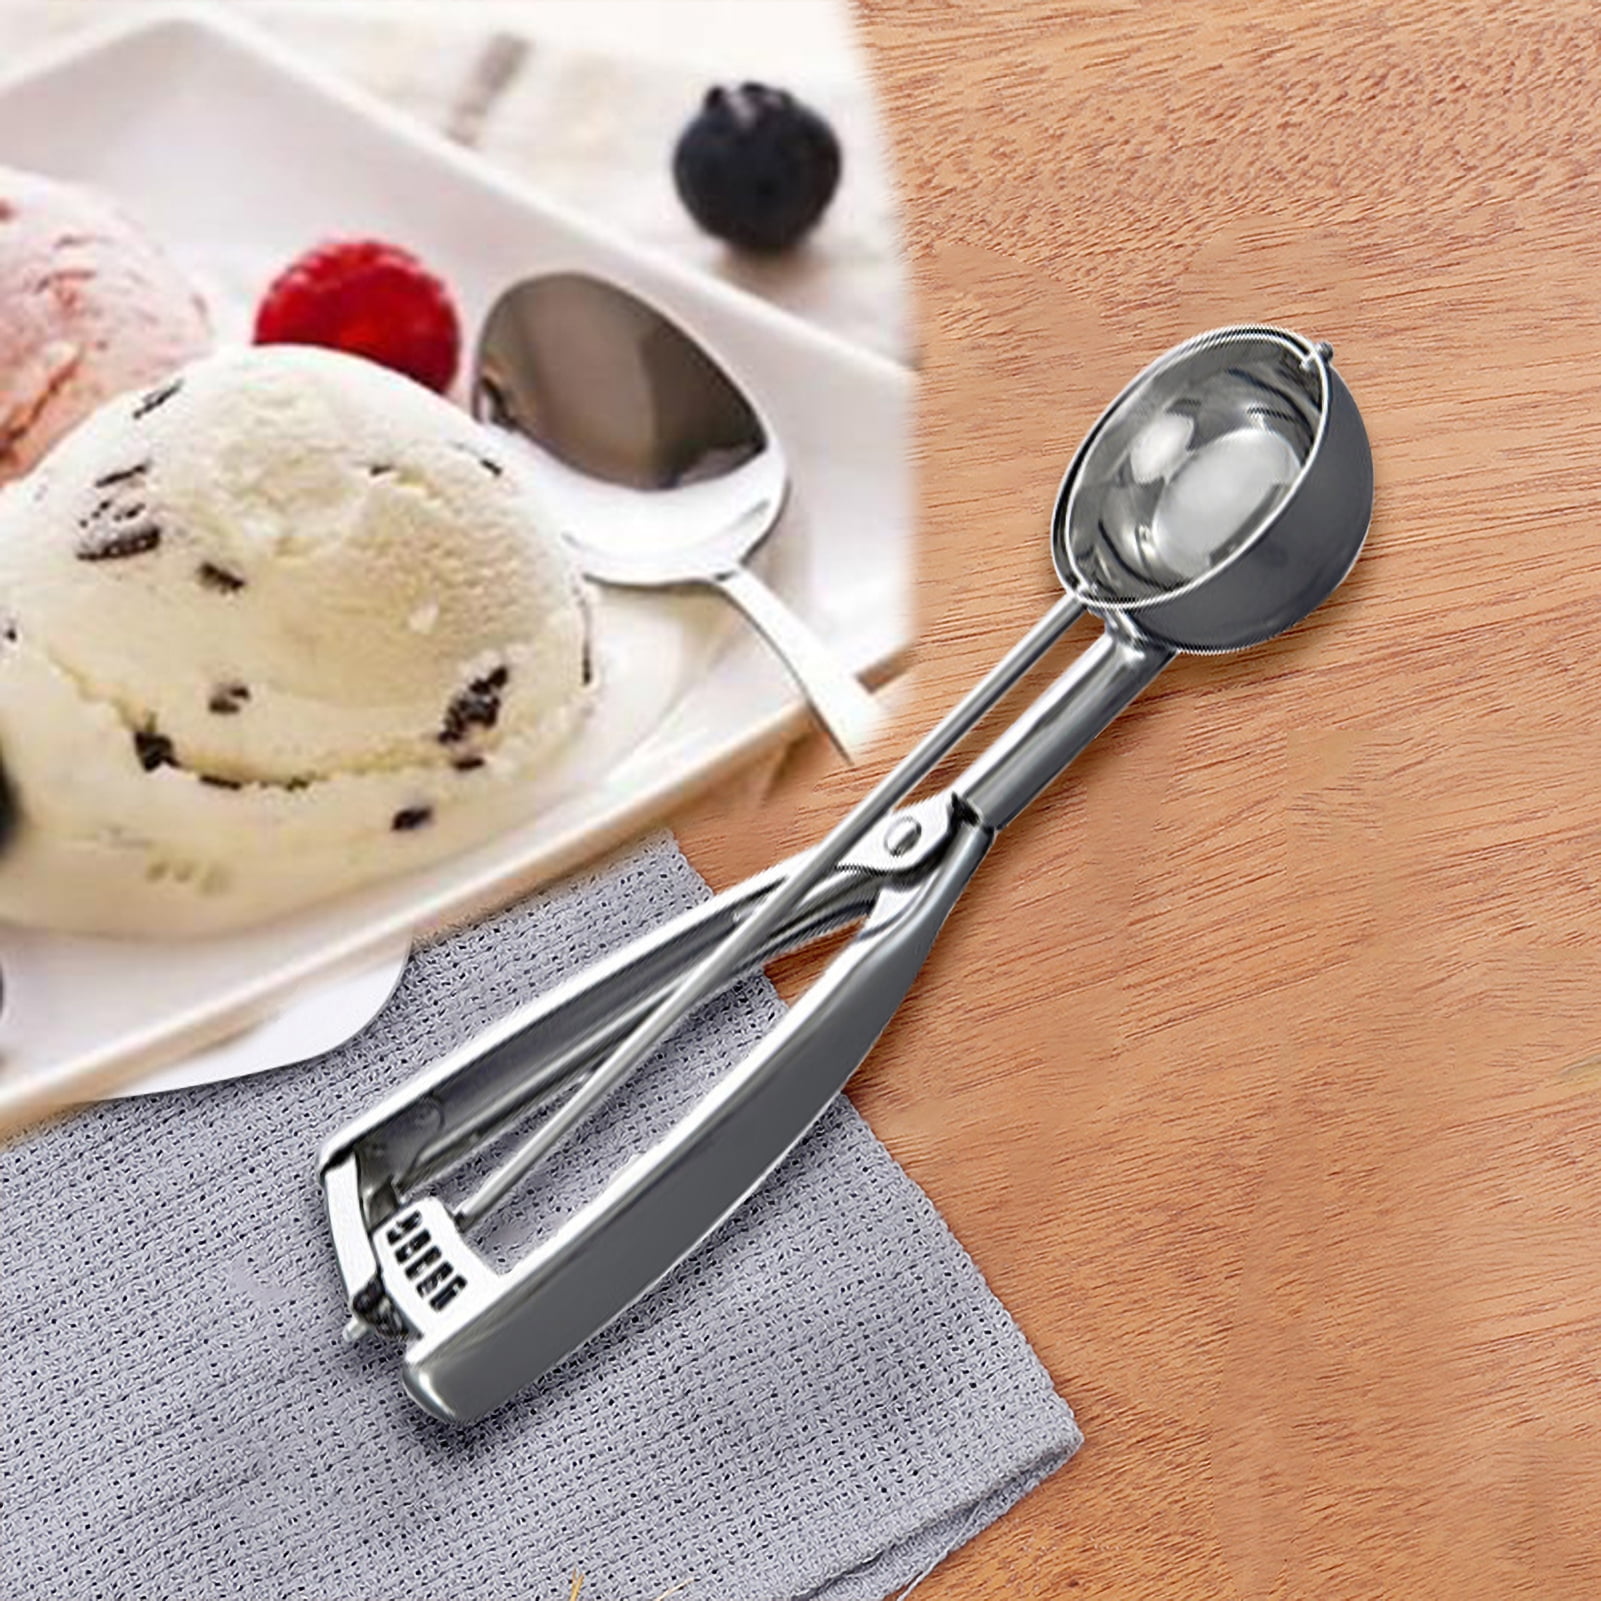 TOPOINT Portion Scoop, Durable Cookie Scoop With Non-Slip Handle